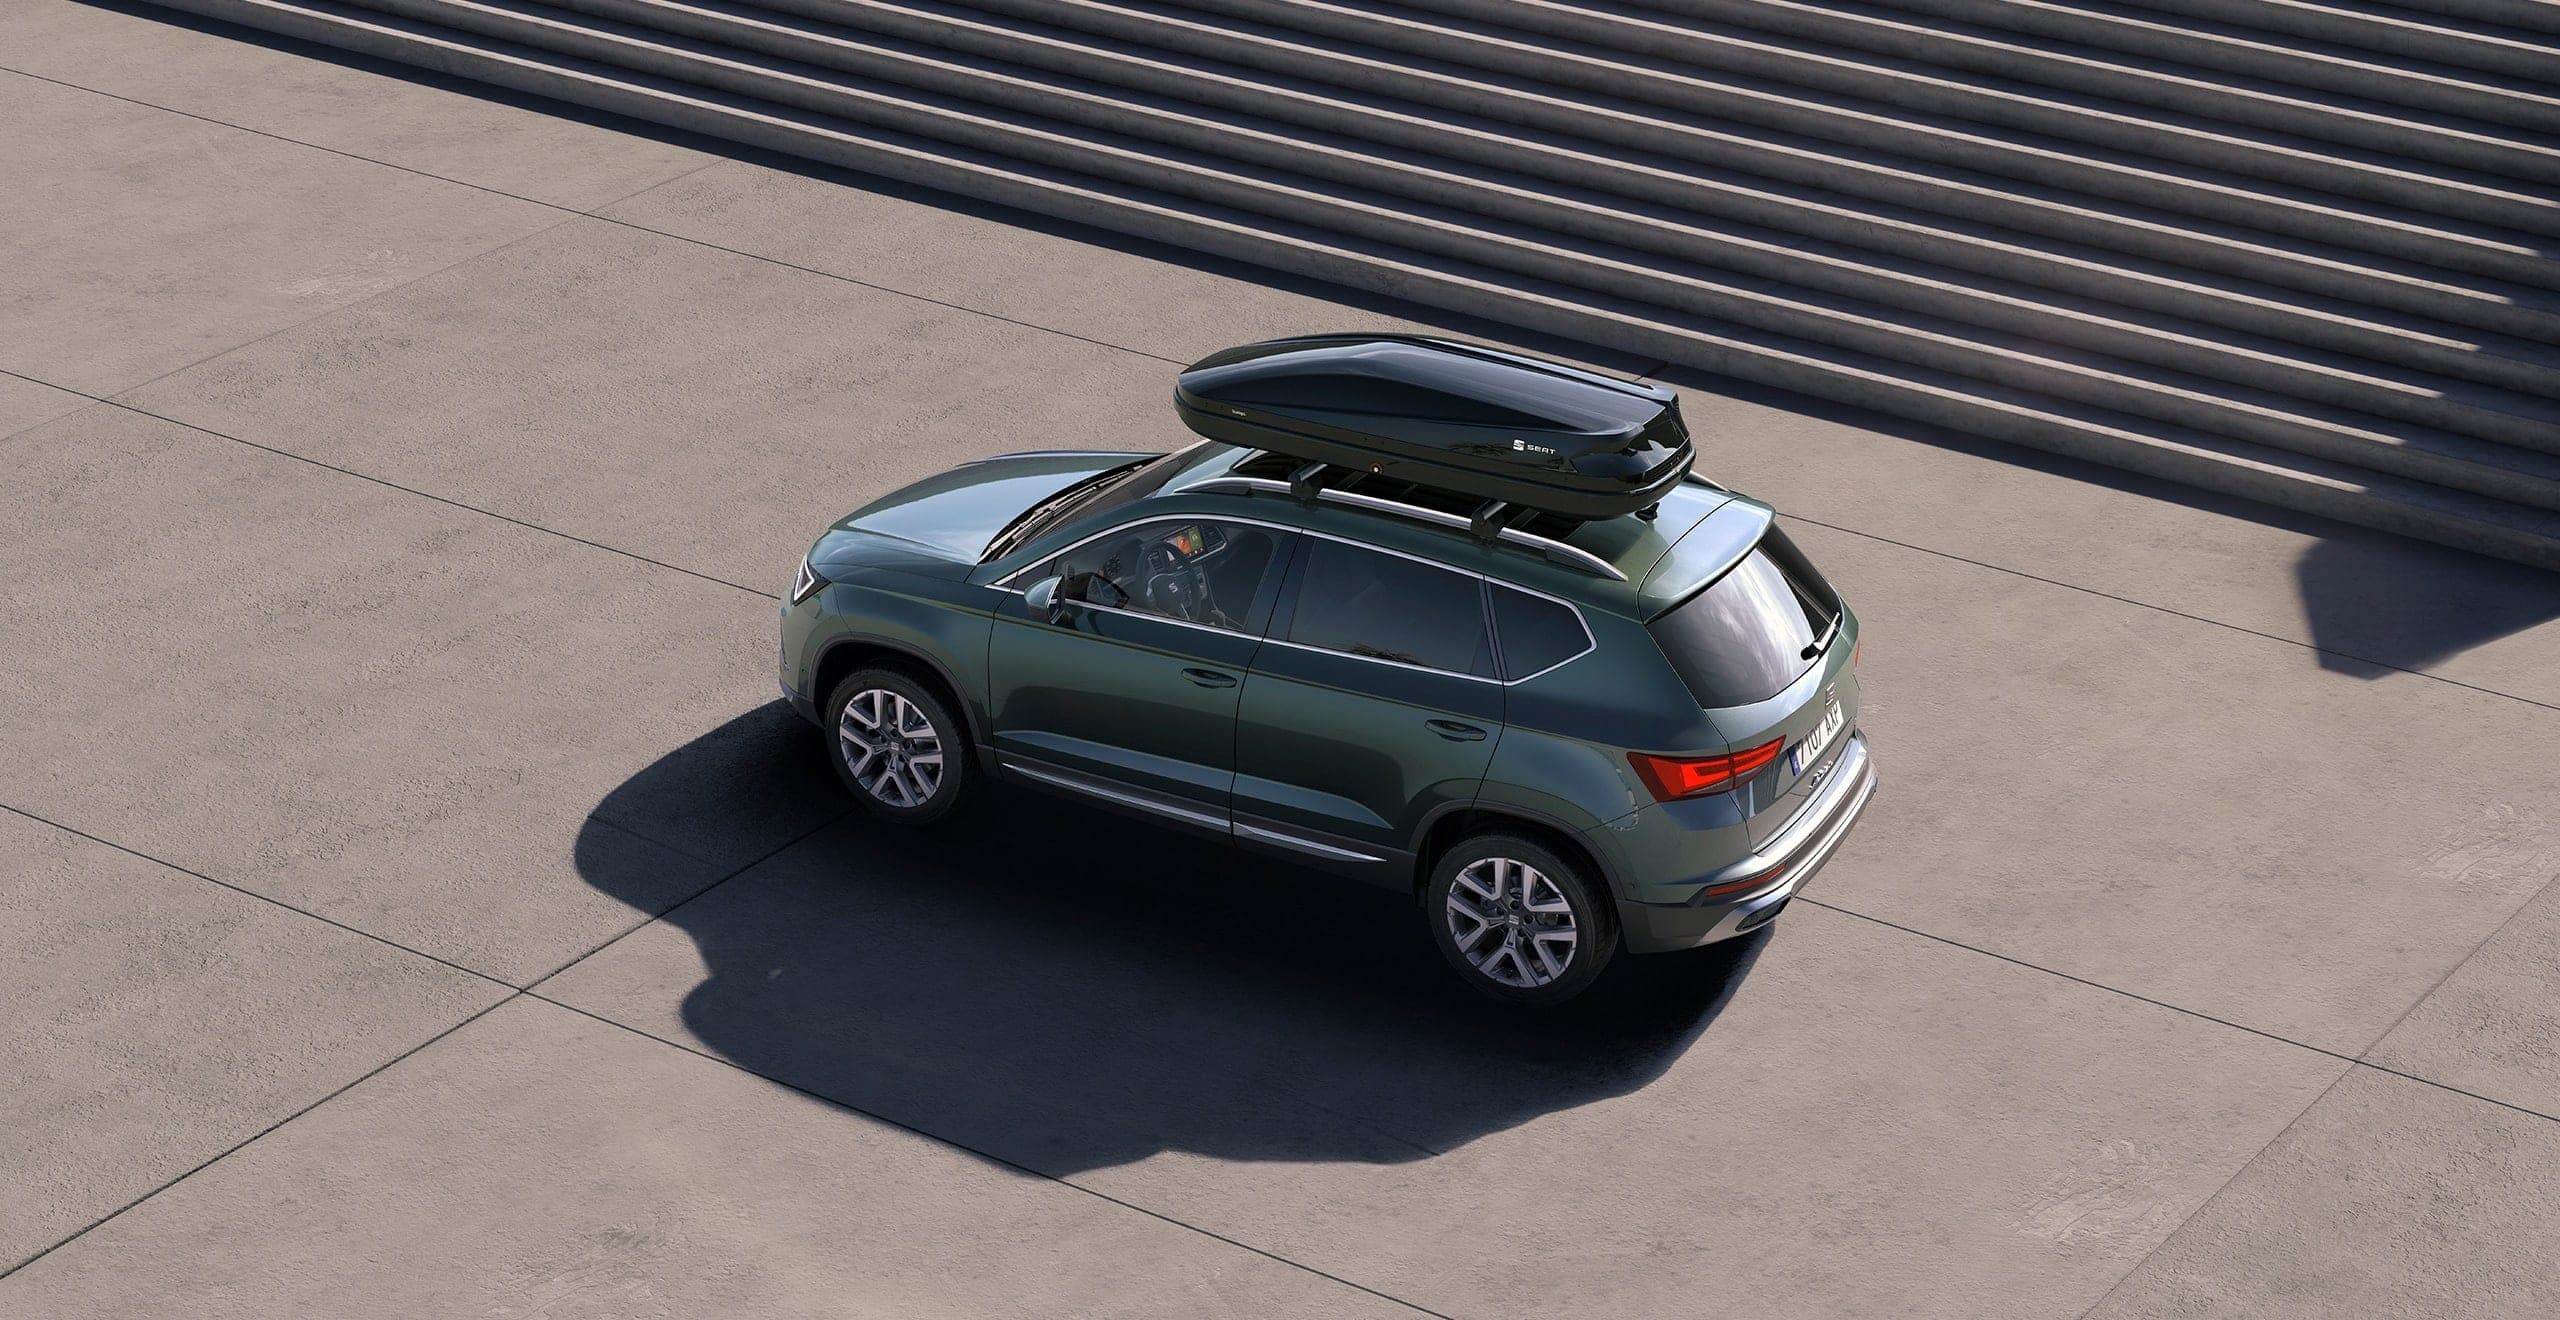 Towing-car-bike-rack-of-the-new-suv-SEAT-Ateca-2020